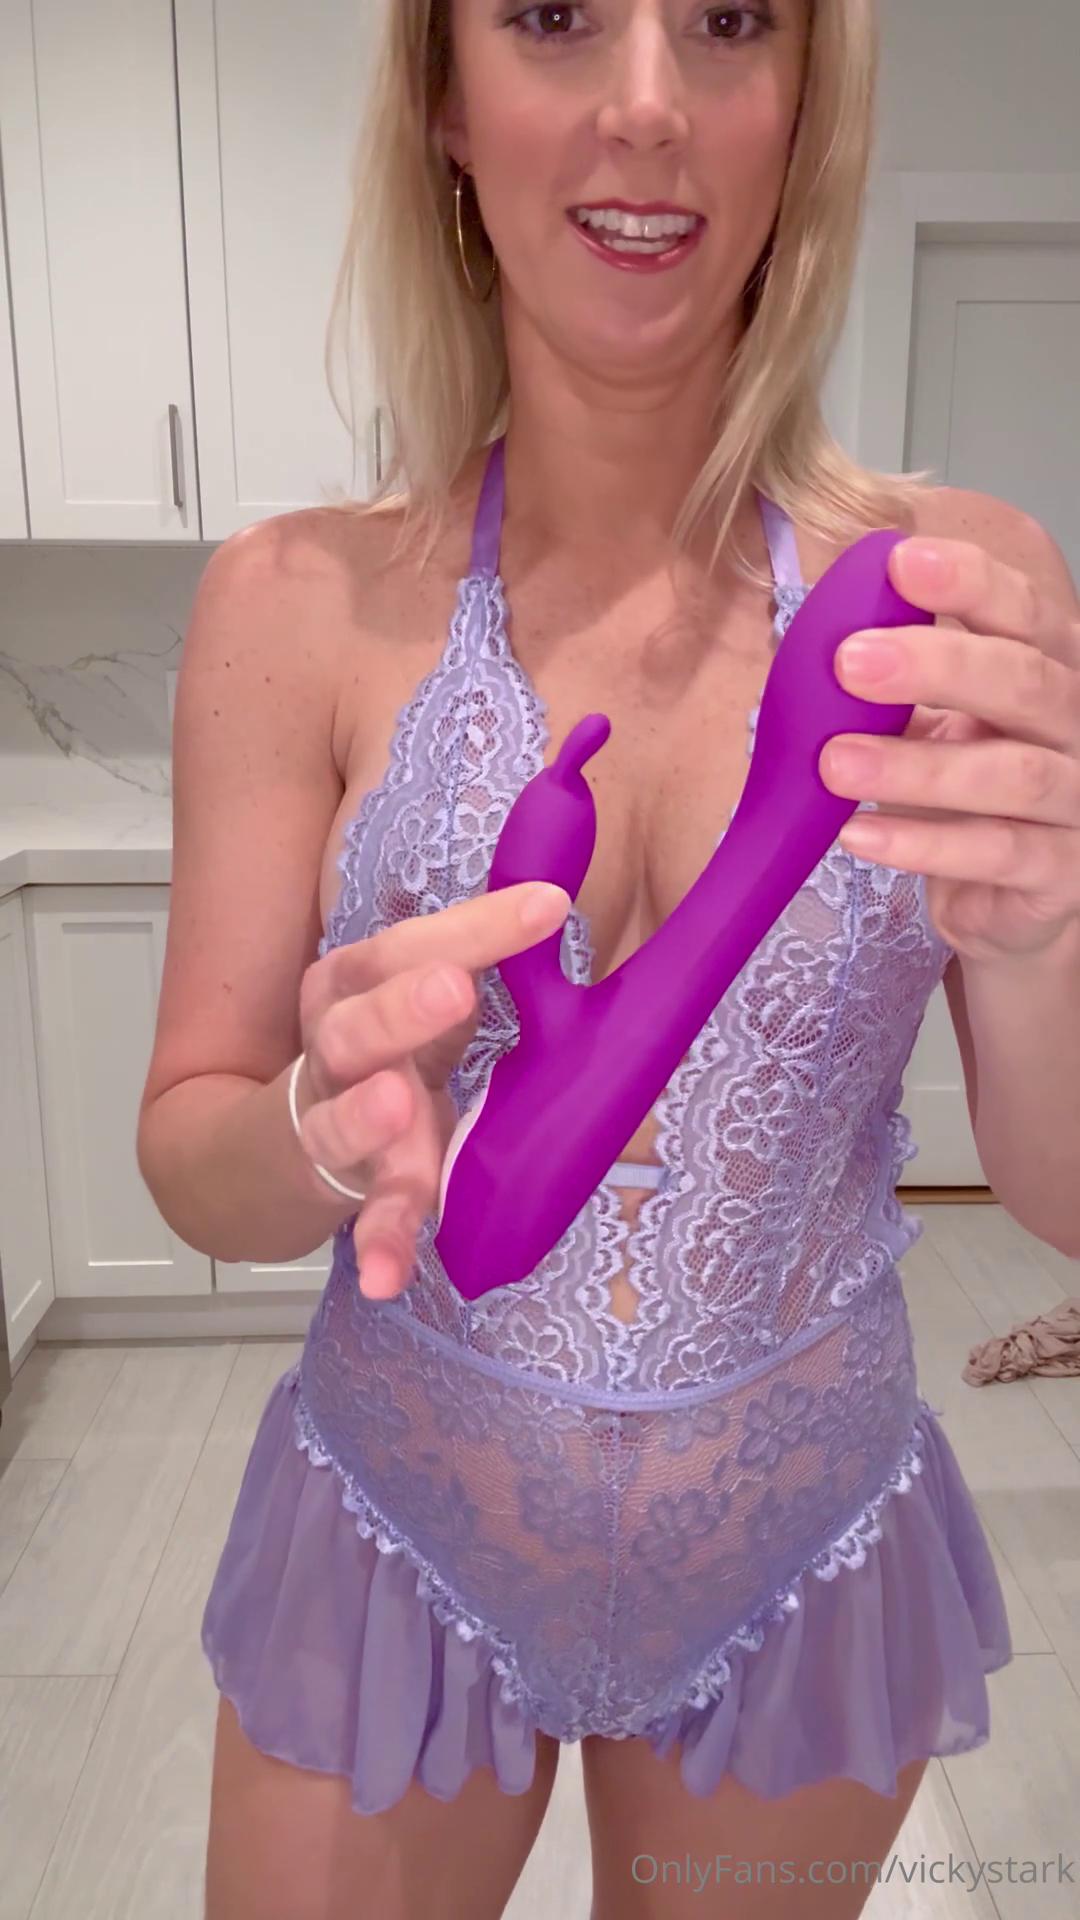 Vicky Stark Nude Matching Vibrator Outfits Onlyfans Video Leaked –.jpg